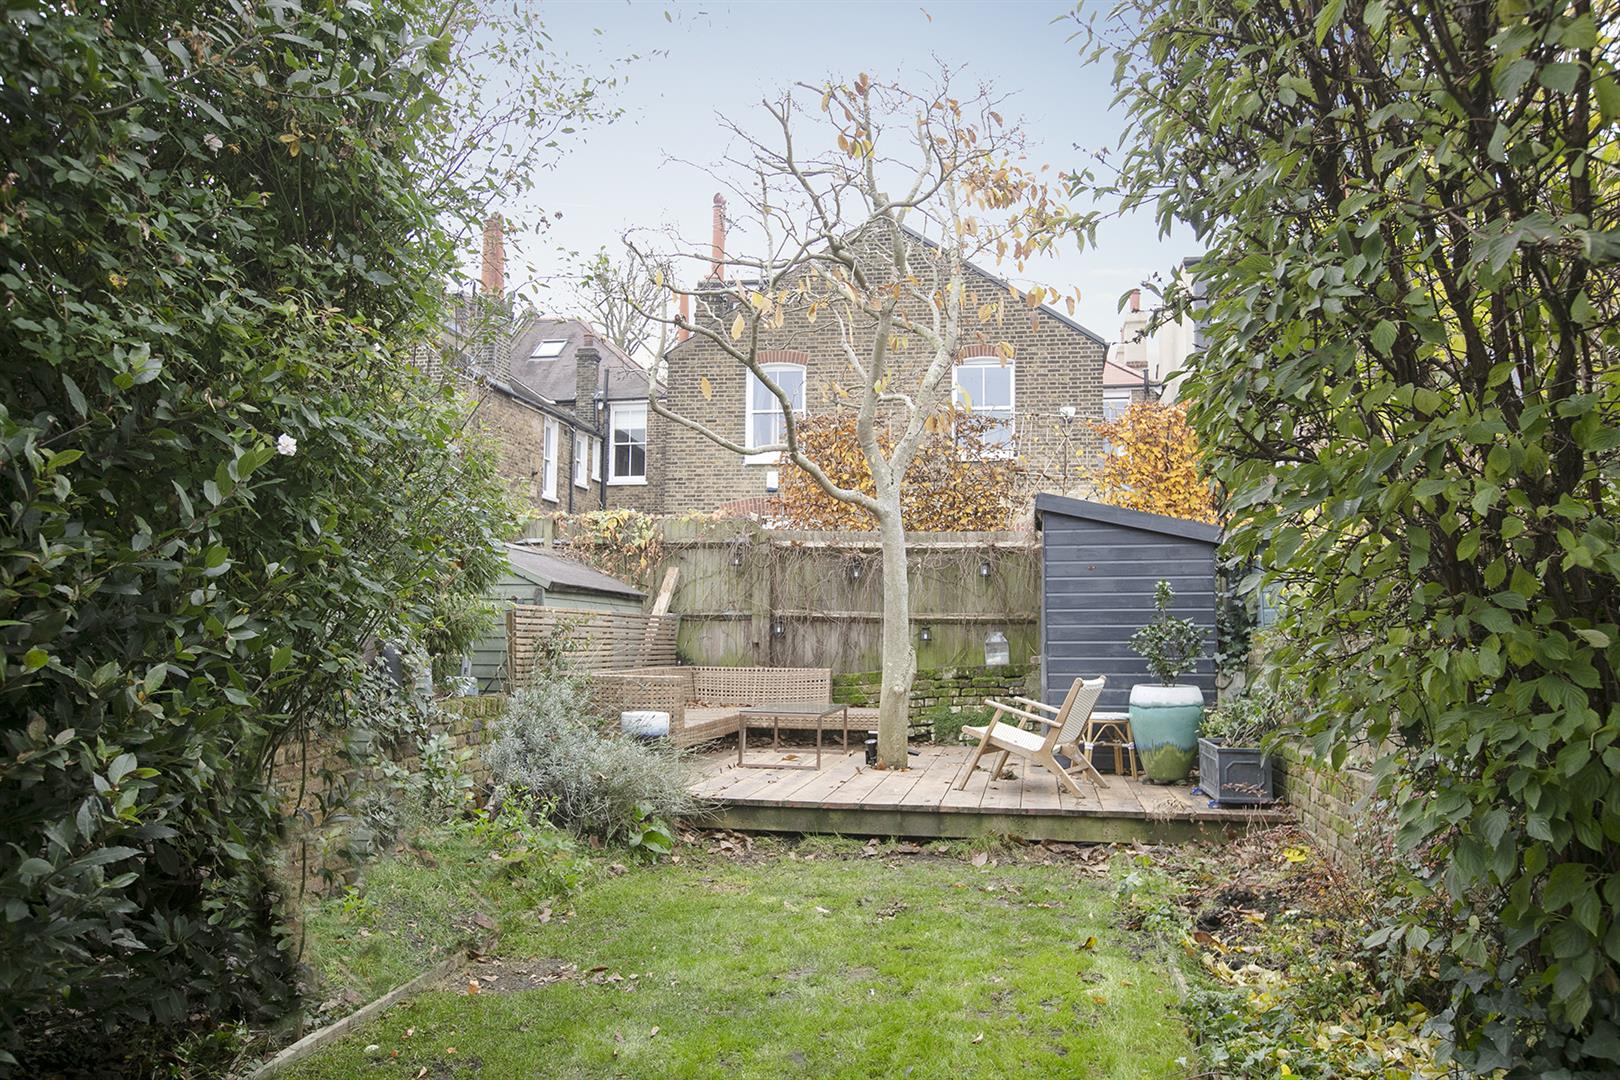 House - Semi-Detached For Sale in Bicknell Road, Herne Hill, SE5 887 view3